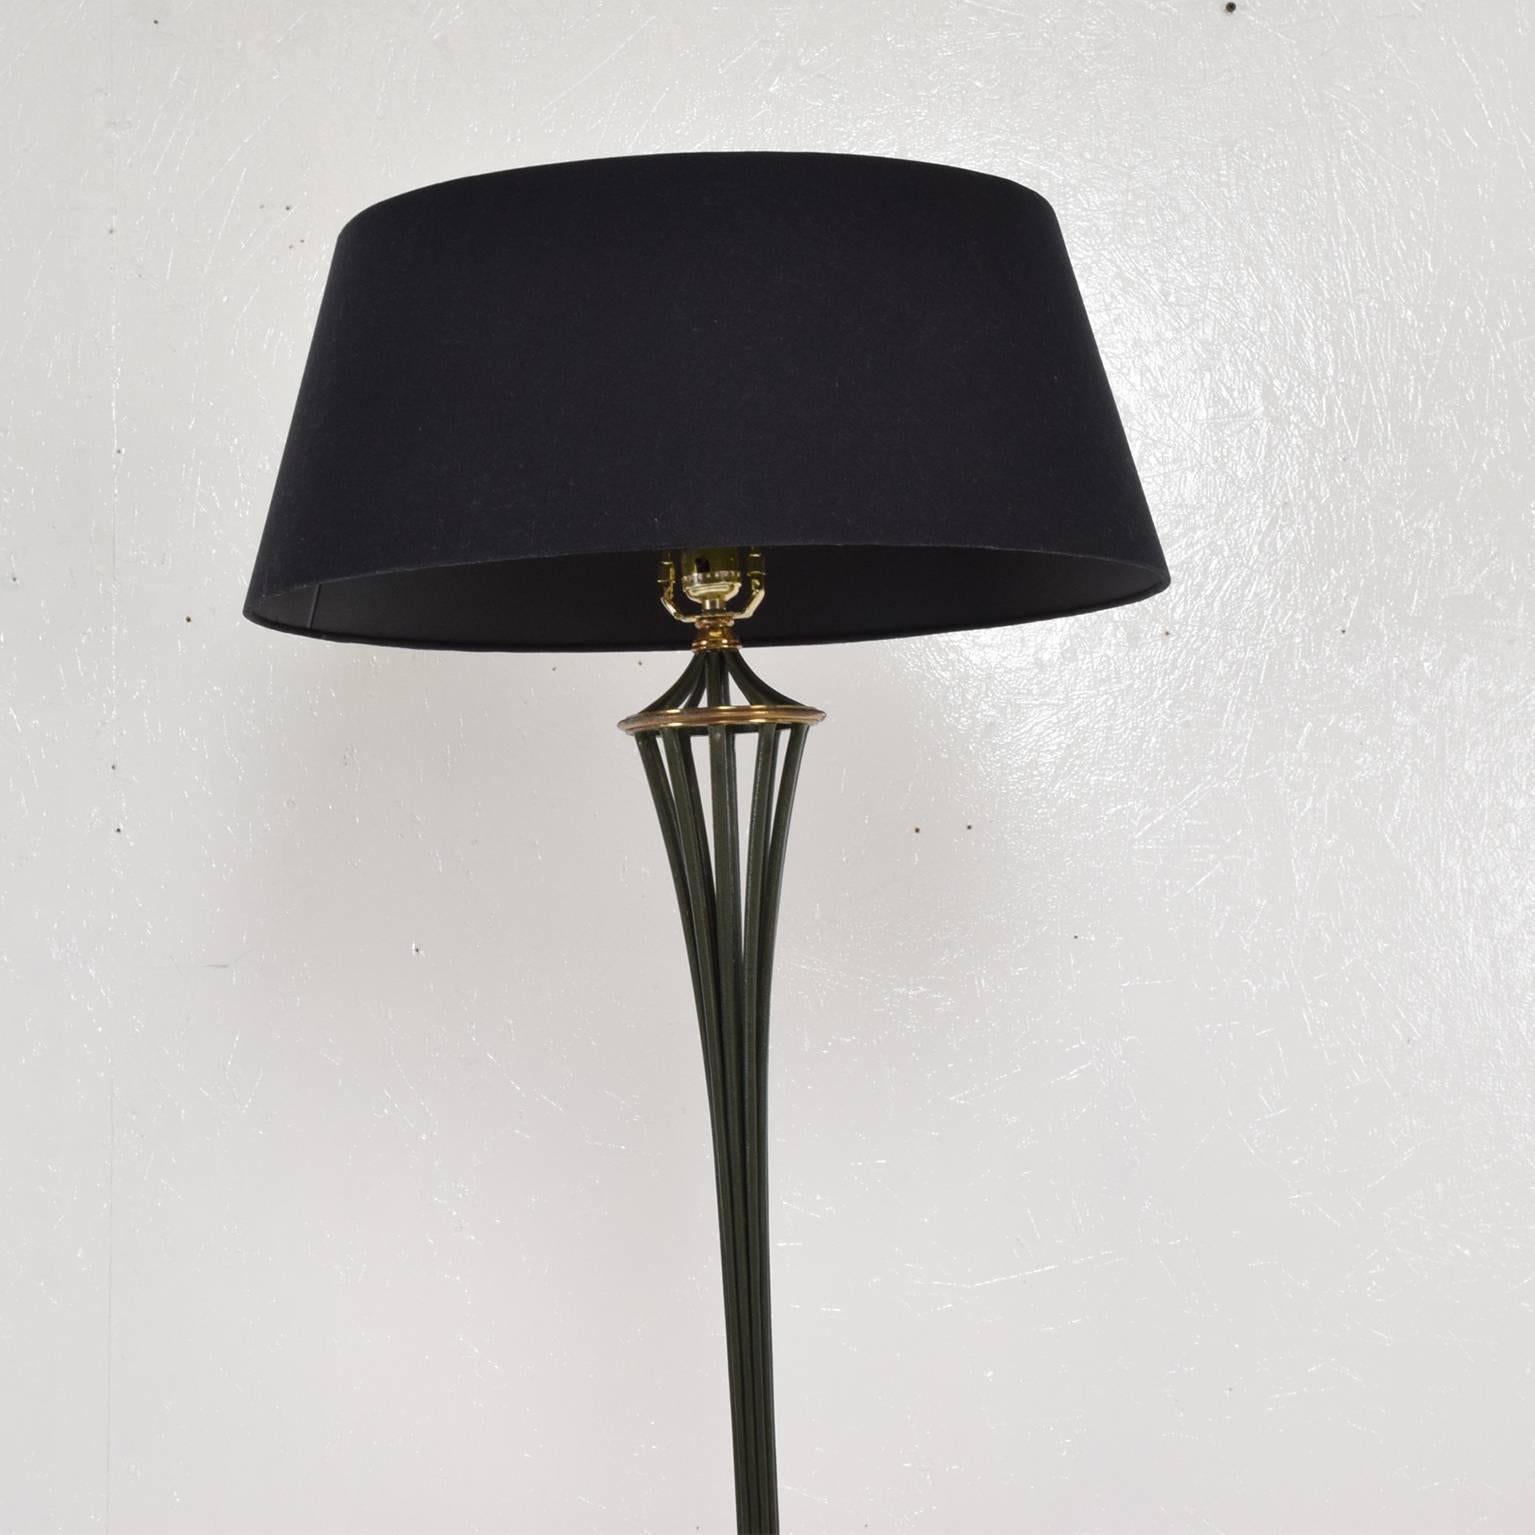 Brass Arturo Pani Refined Elegance Floor Lamp with Scalloped Table Mexico City 1940s